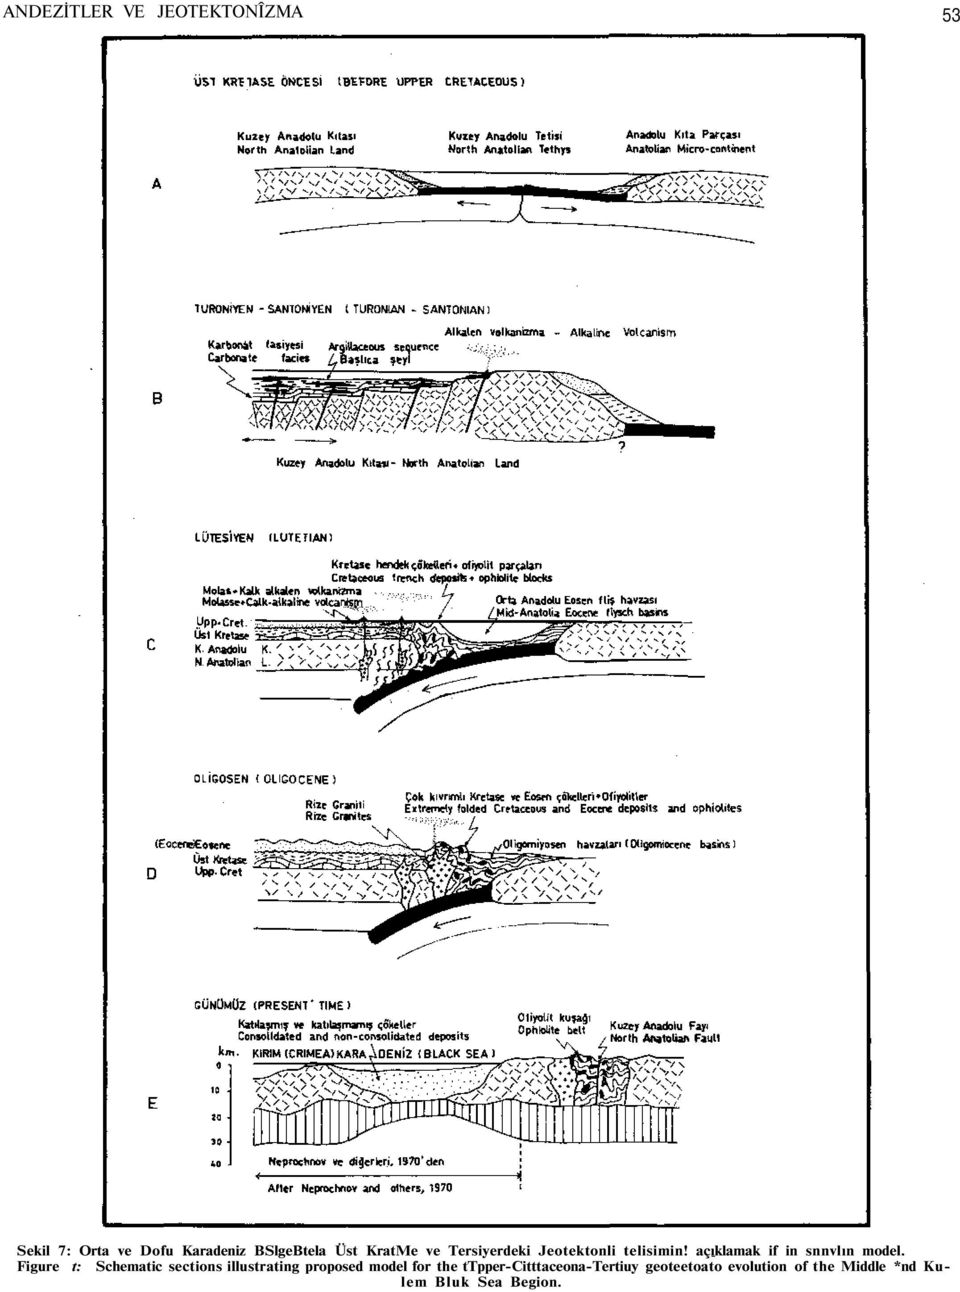 Figure t: Schematic sections illustrating proposed model for the